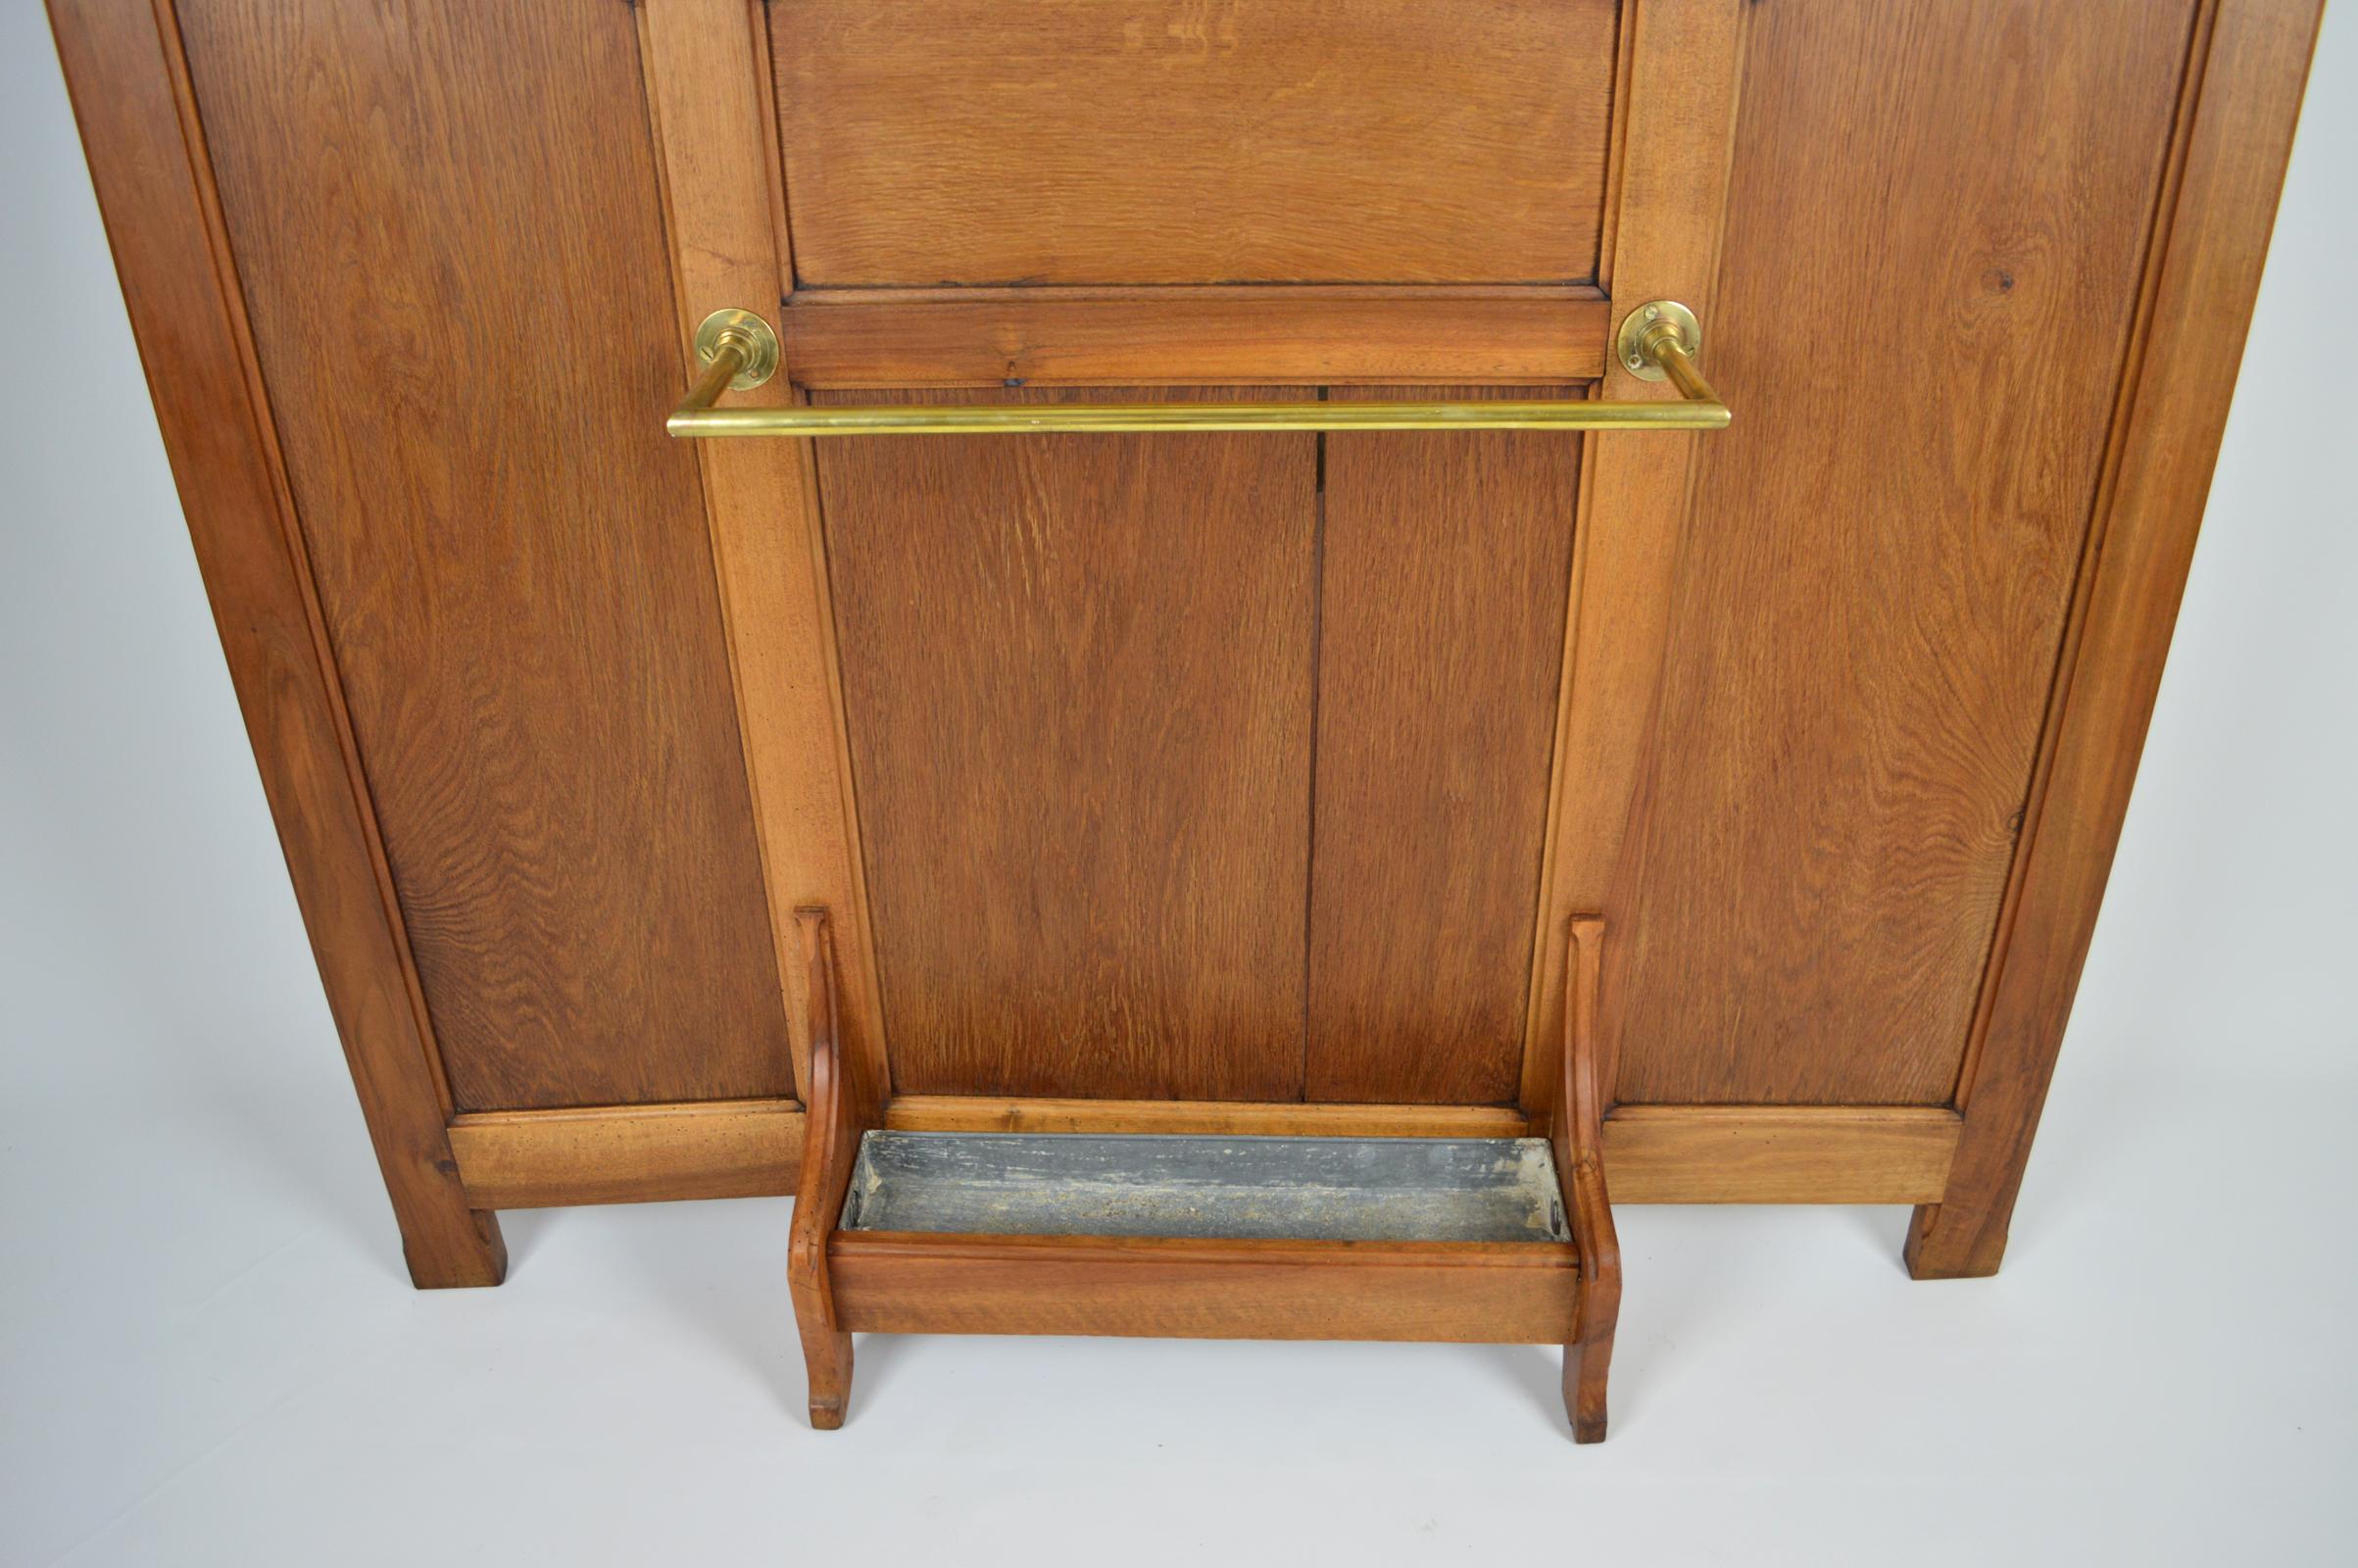 Wonderful hall stand in carved walnut and chestnut. 
6 beautiful bronze coat hooks.
1 umbrella Stand.

In the style of Gustave Serrurier-Bovy.

Art Nouveau, France or Belgium, circa 1900.

In good condition, the wood was treated against